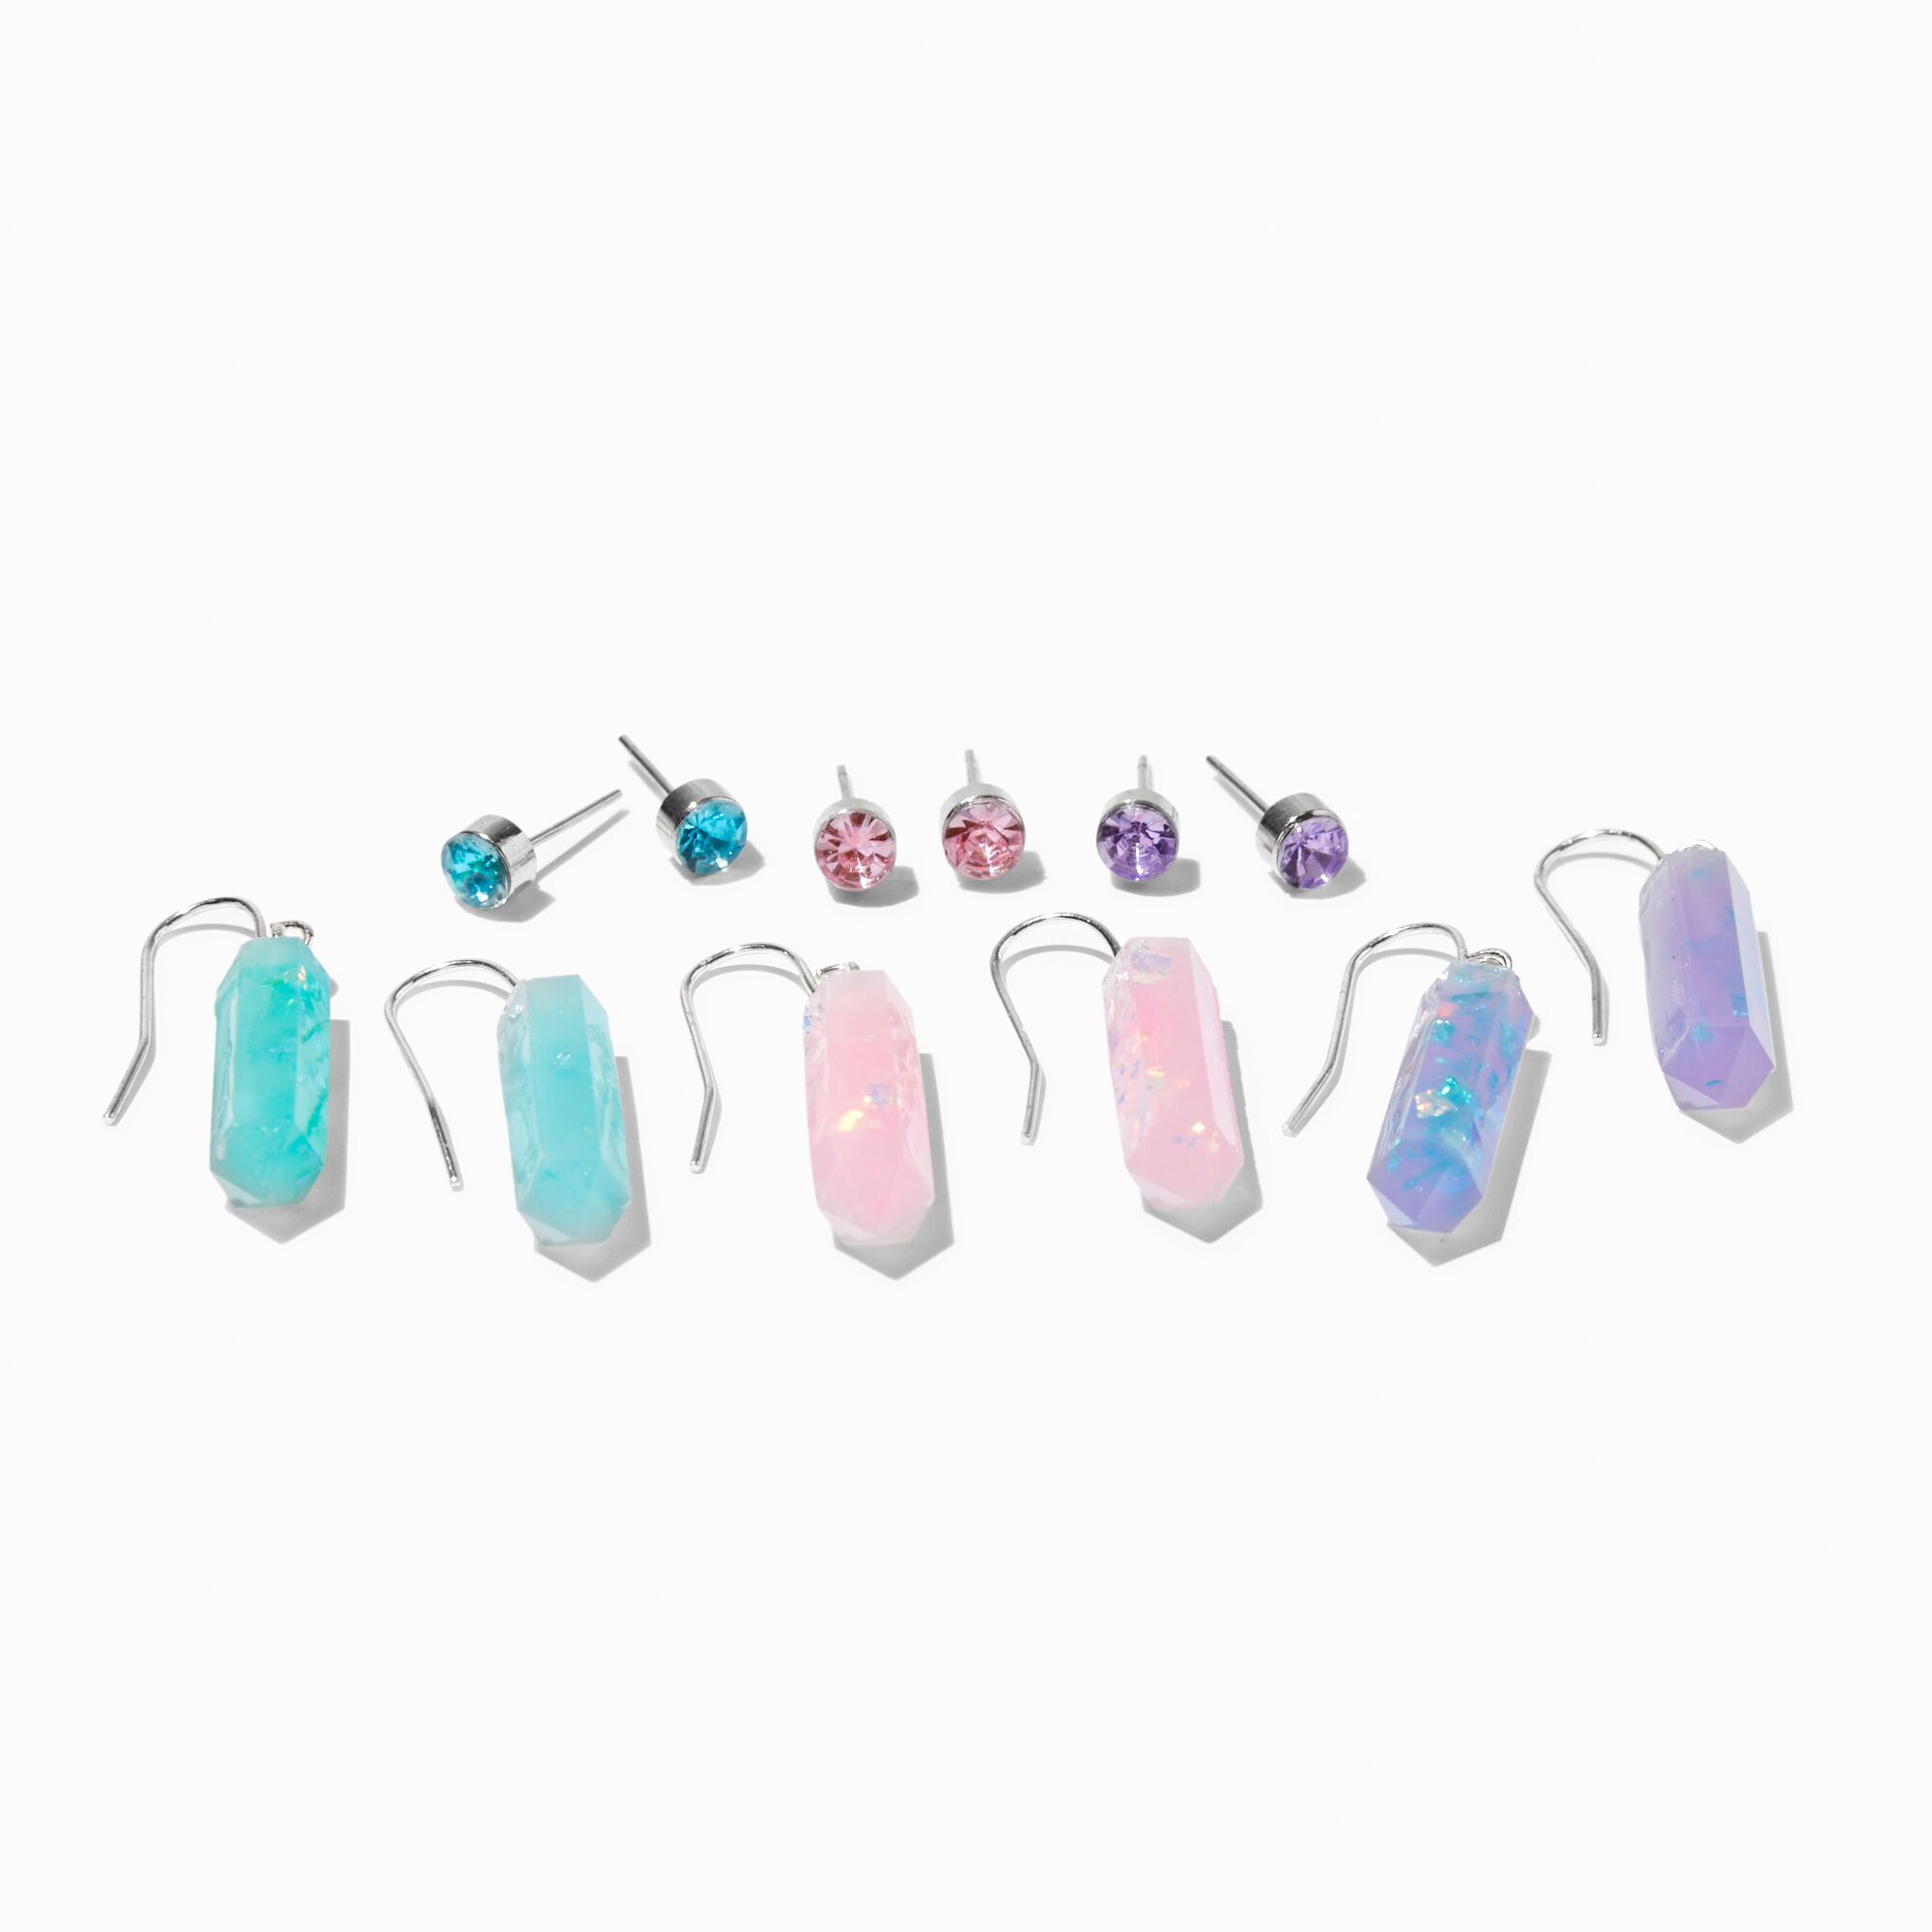 View Claires Glow In The Dark Mystical Gem Earrings Set 6 Pack Silver information